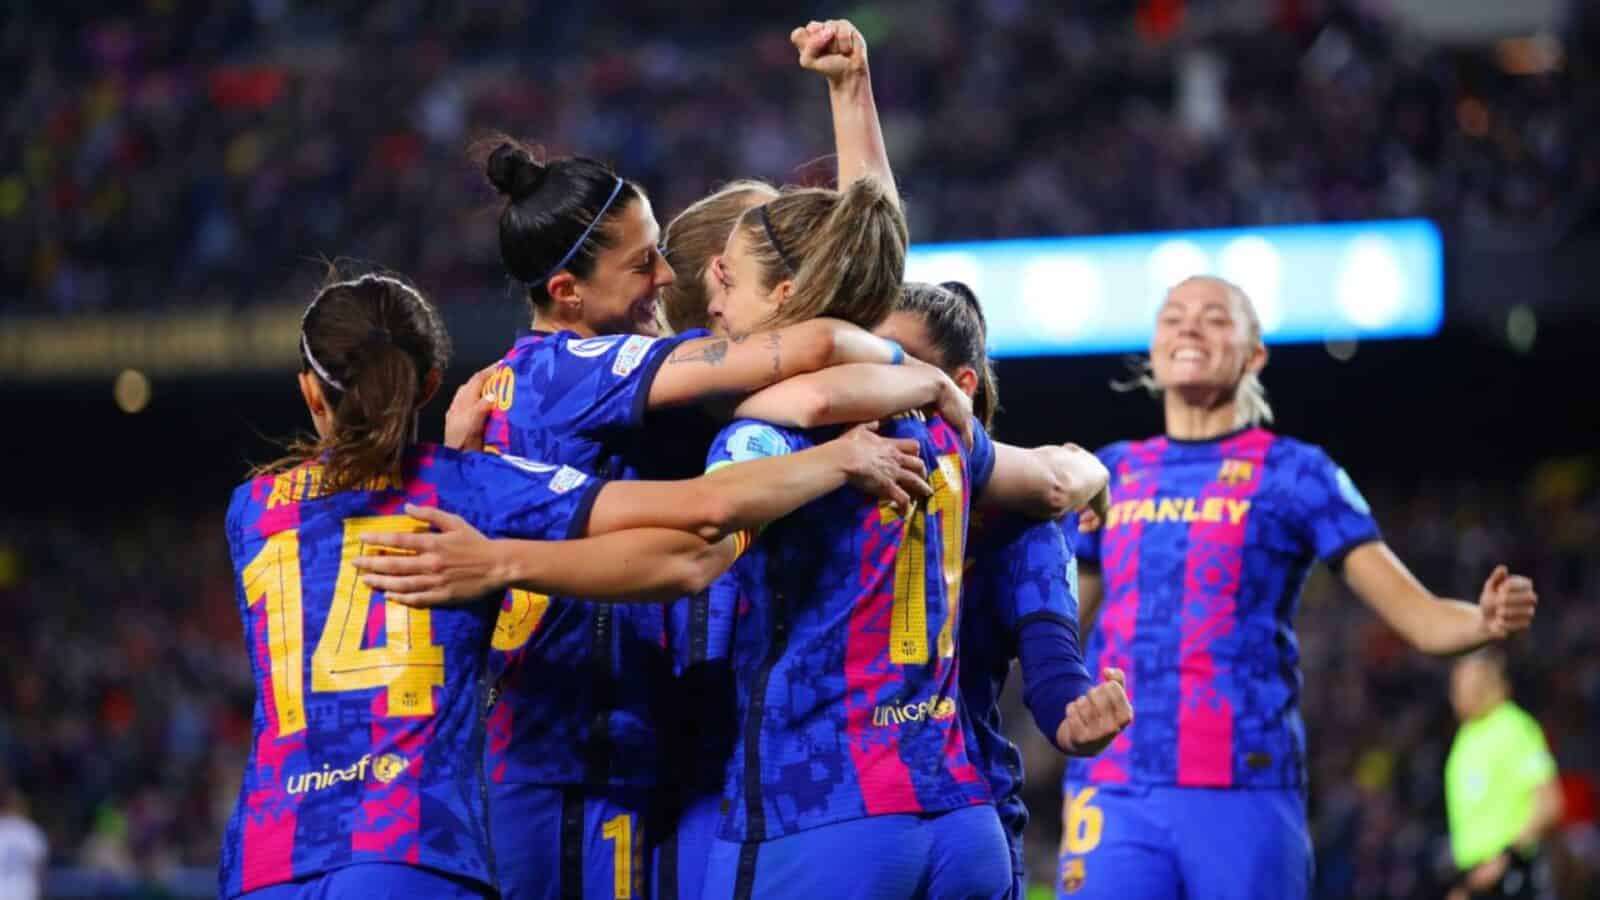 FC Barcelona and World of Women Launch Empowerment NFTs Celebrating Women in Sports